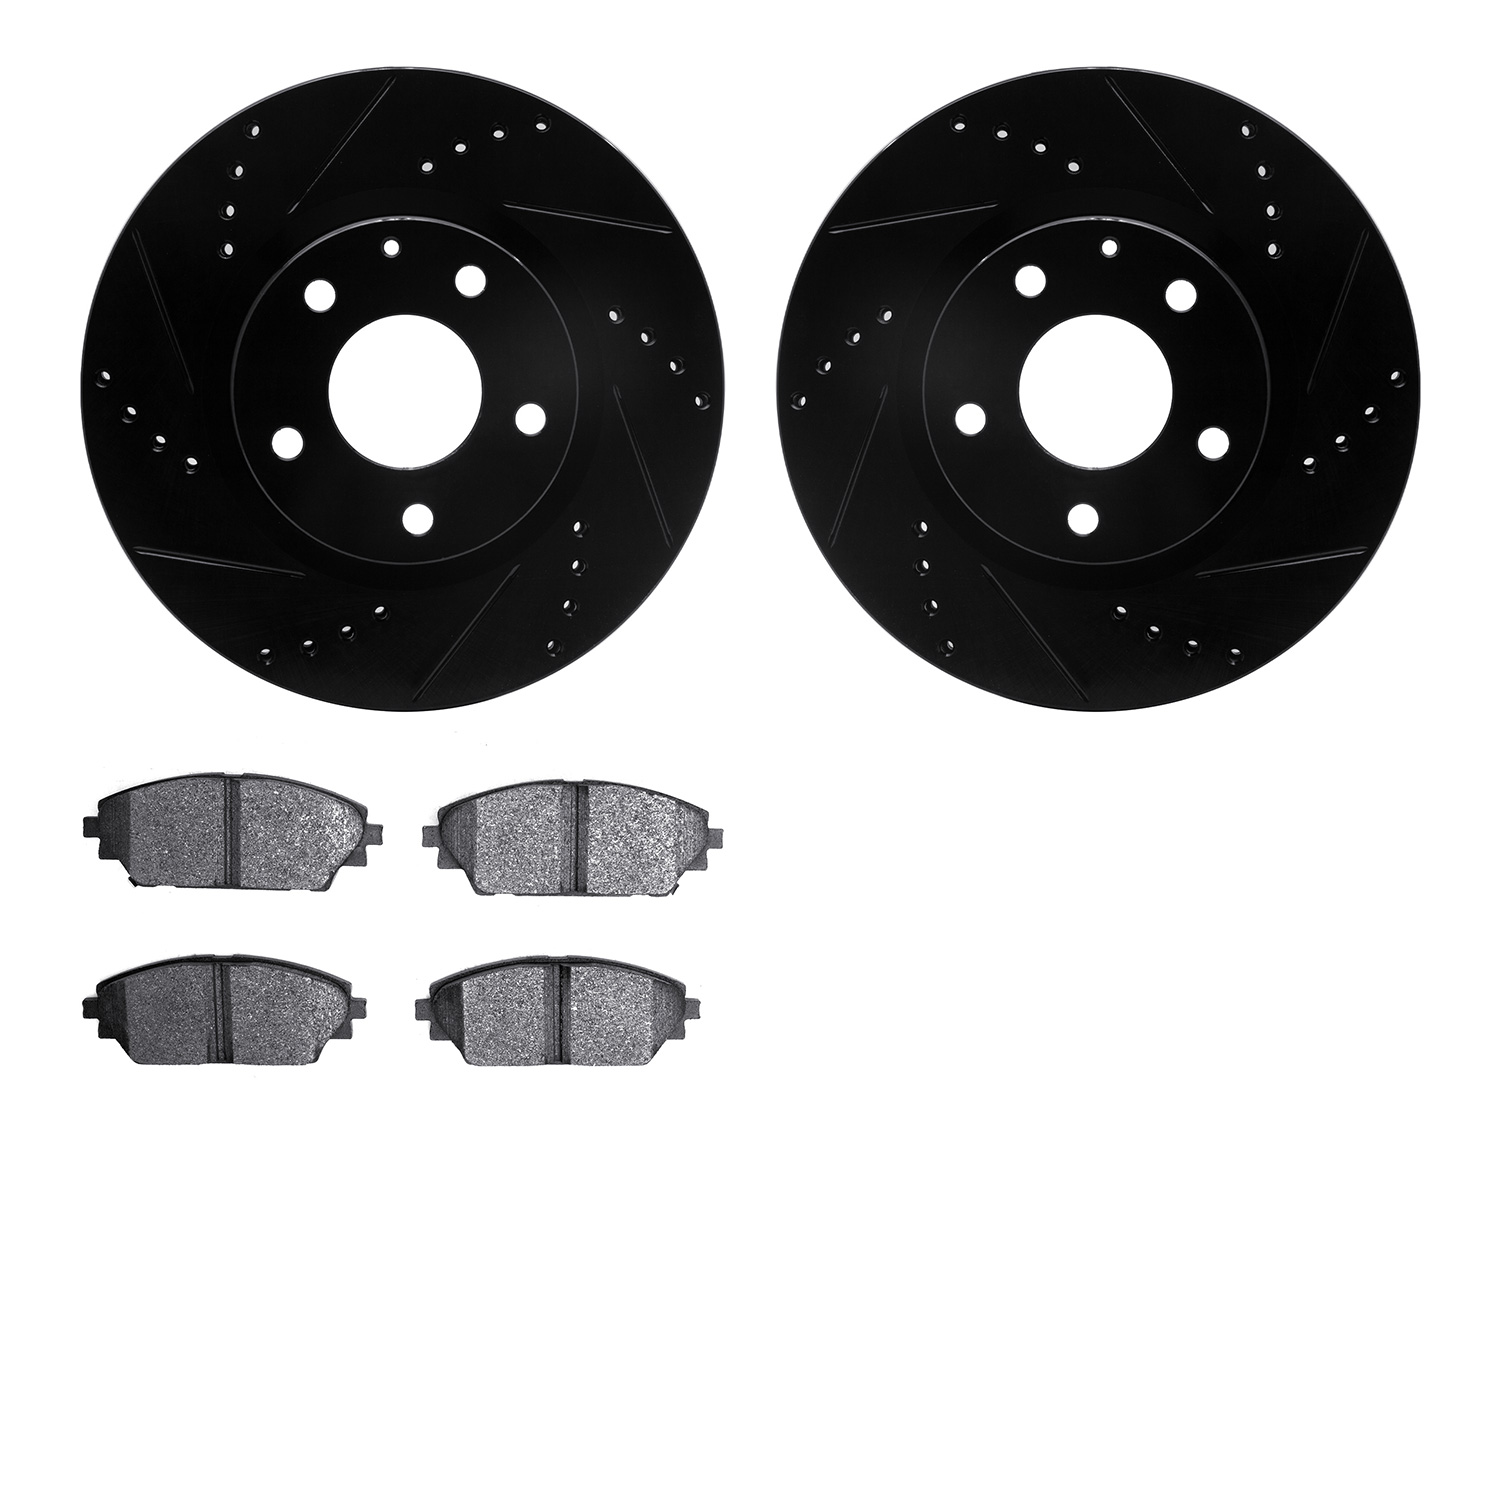 8302-80080 Drilled/Slotted Brake Rotors with 3000-Series Ceramic Brake Pads Kit [Black], Fits Select Ford/Lincoln/Mercury/Mazda,